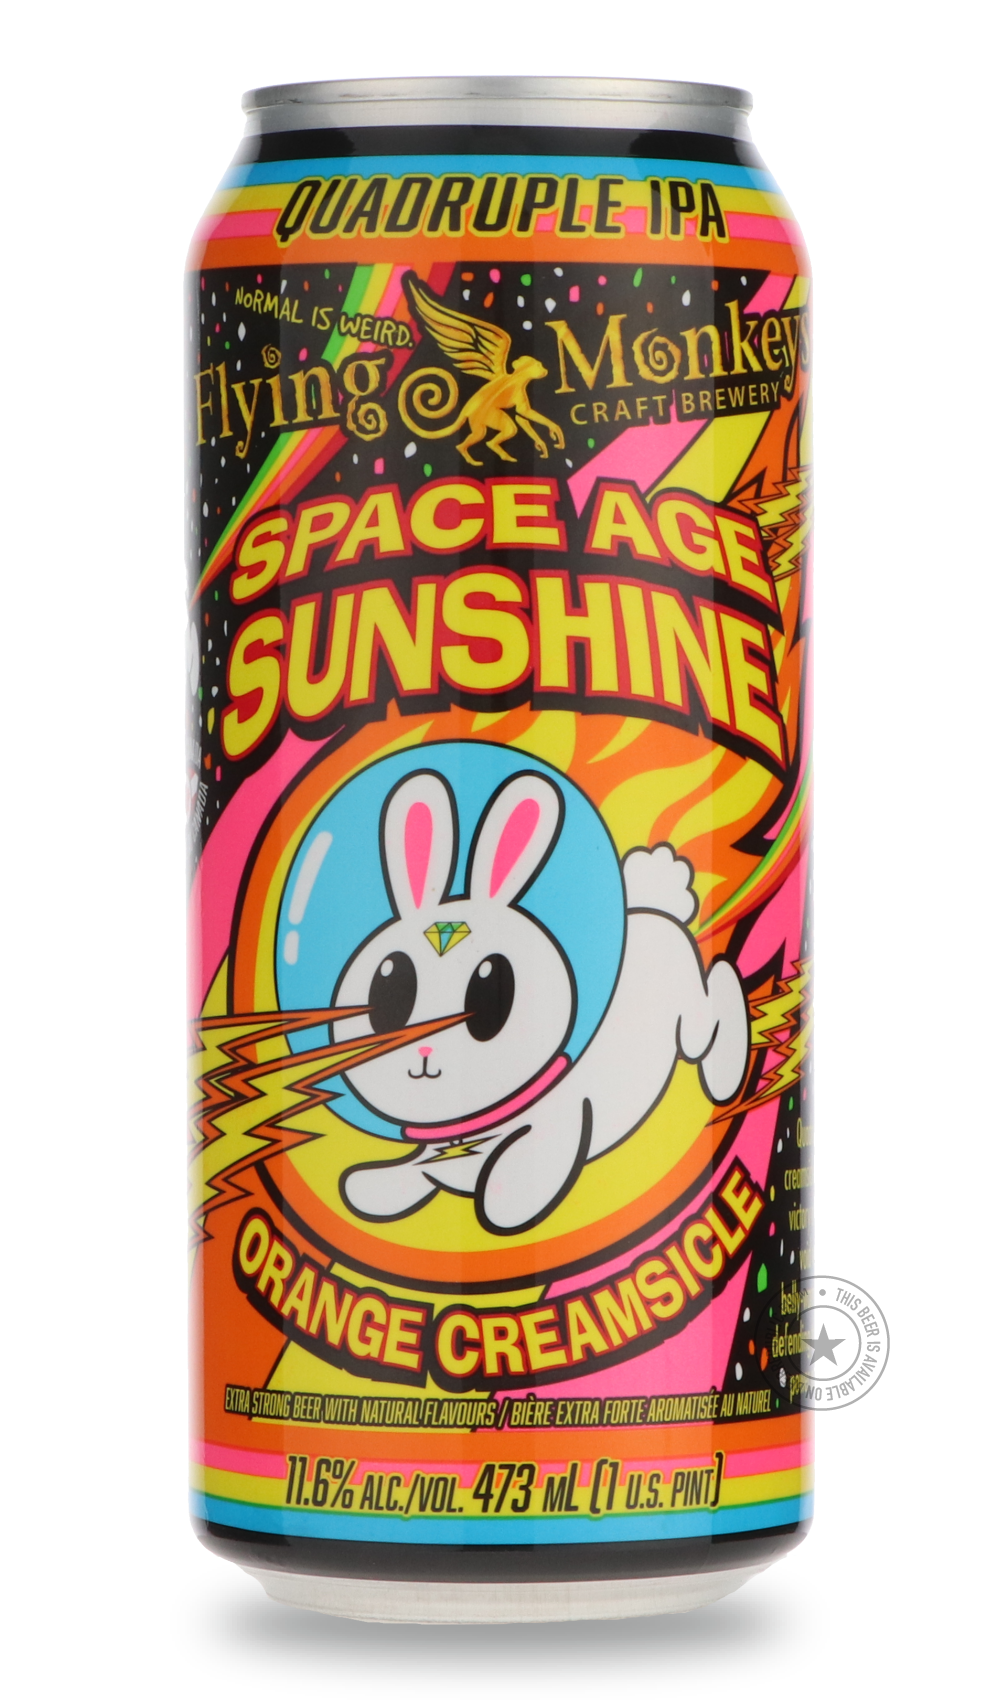 -Flying Monkeys- Space Age Sunshine-IPA- Only @ Beer Republic - The best online beer store for American & Canadian craft beer - Buy beer online from the USA and Canada - Bier online kopen - Amerikaans bier kopen - Craft beer store - Craft beer kopen - Amerikanisch bier kaufen - Bier online kaufen - Acheter biere online - IPA - Stout - Porter - New England IPA - Hazy IPA - Imperial Stout - Barrel Aged - Barrel Aged Imperial Stout - Brown - Dark beer - Blond - Blonde - Pilsner - Lager - Wheat - Weizen - Amber